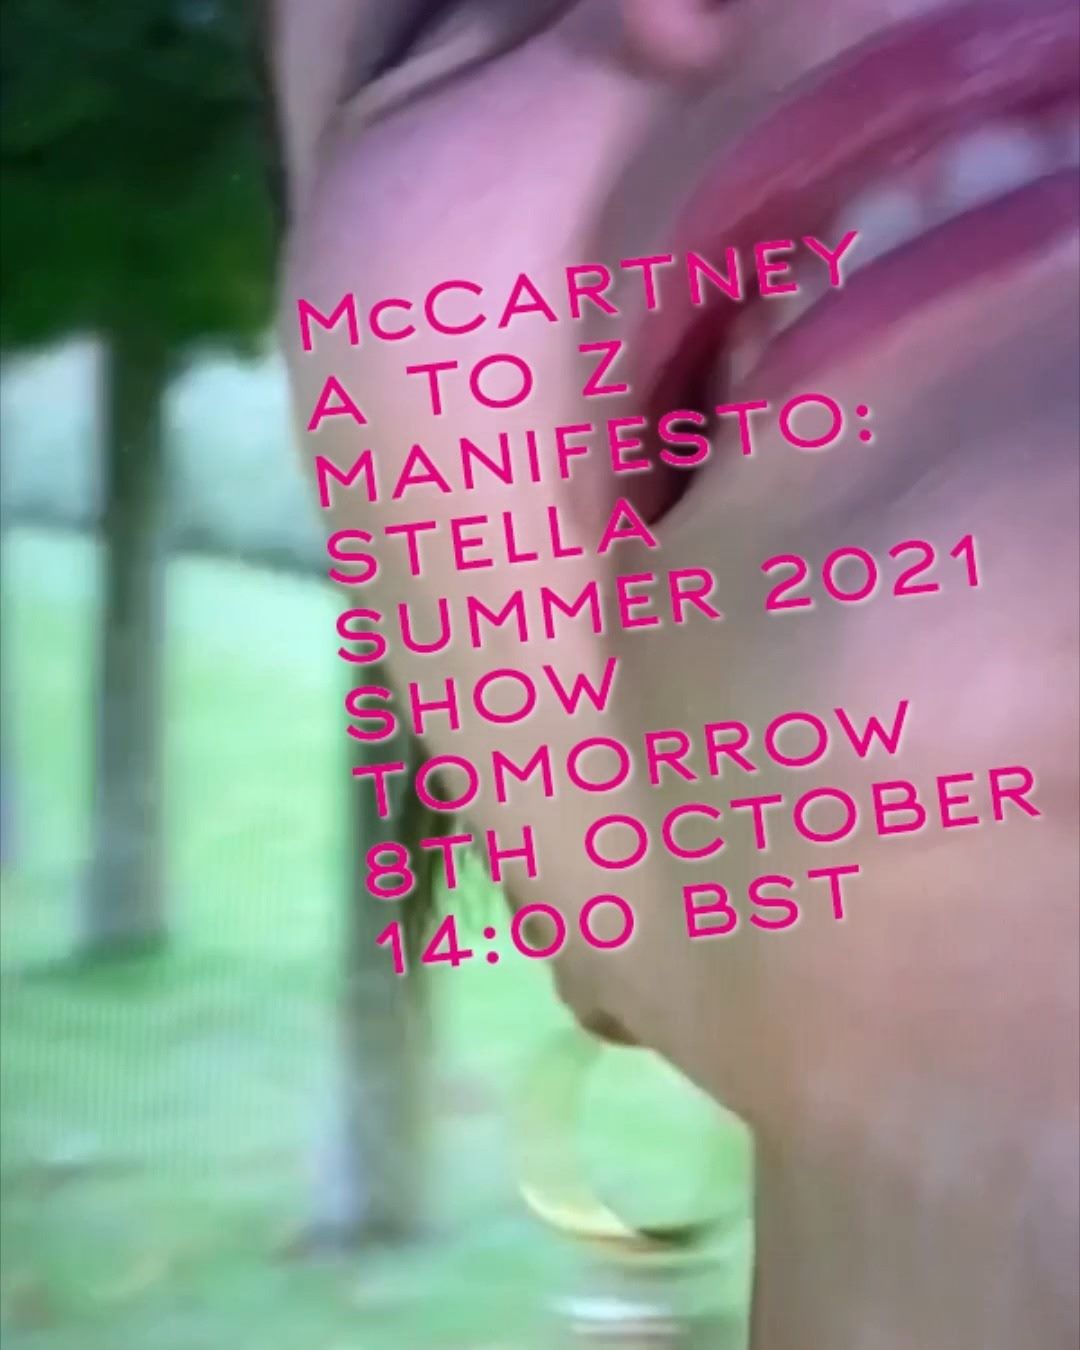 Stella McCartney - Join our McCartney A to Z Manifesto: Summer 2021 Show tomorrow at 14:00 BST here on @StellaMcCartney.⁣
⁣
Tomorrow 09:00 EST / 14:00 BST / 21:00 CST / 22:00 JST⁣
 ⁣
#StellaSummer21 #...